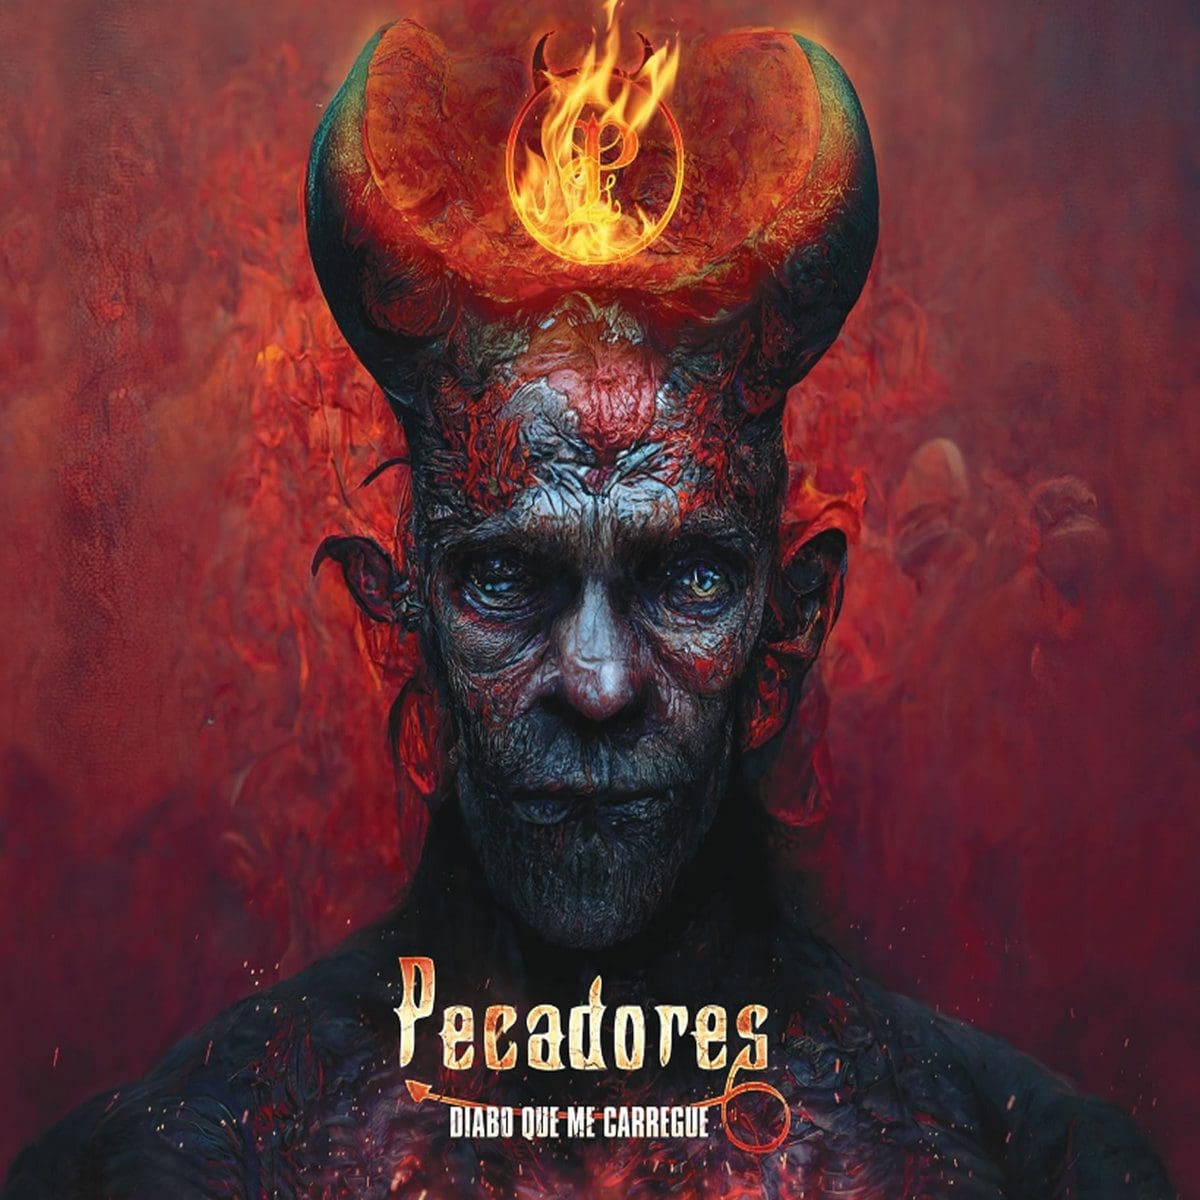 Brazilian aggrotech act Pecadores back with first new album in 11 years